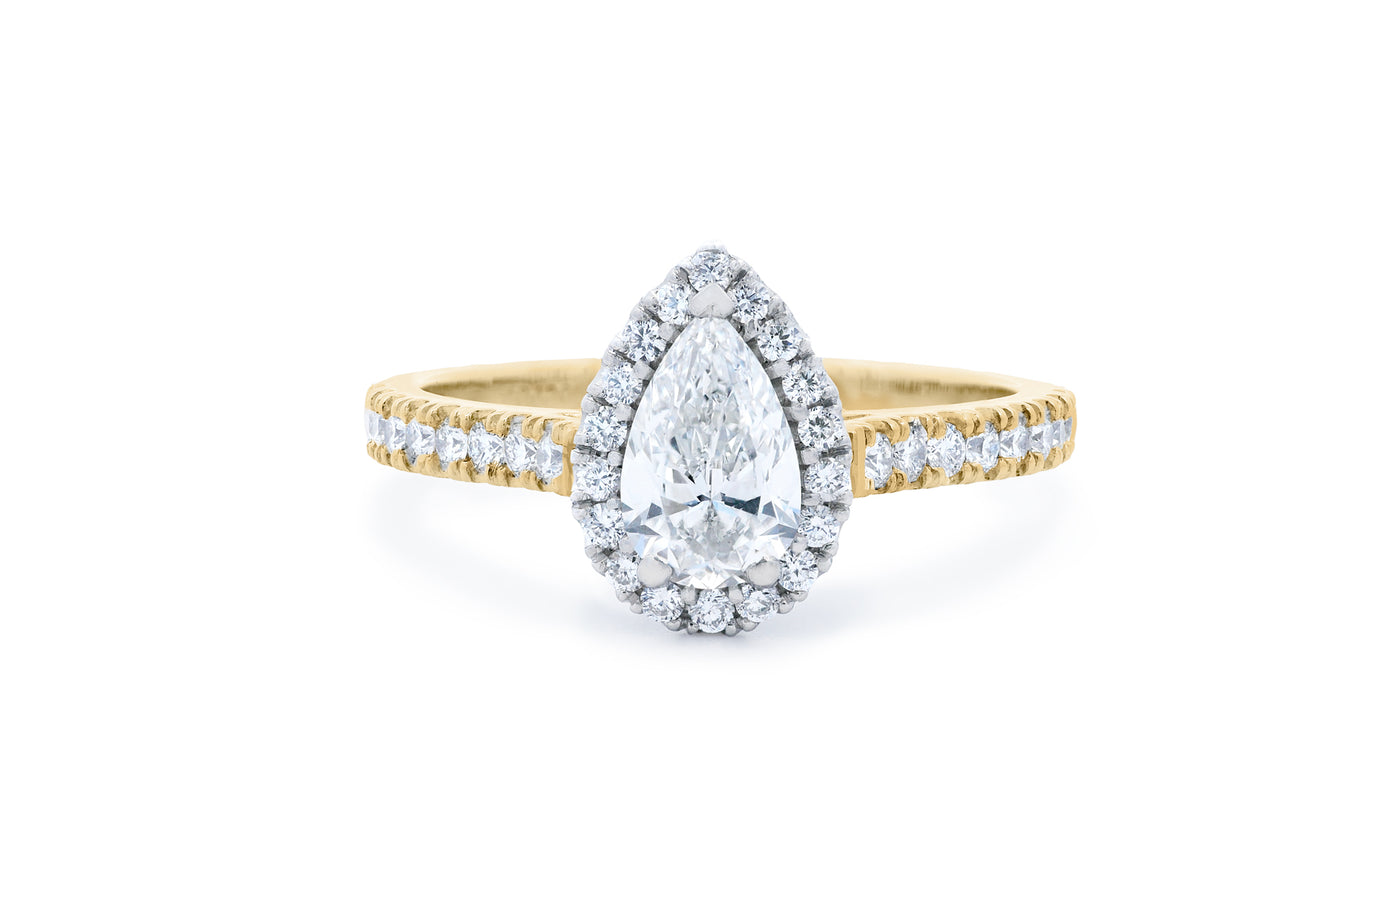 Adorn: Pear Cut Diamond Halo Ring in yellow gold and platinum